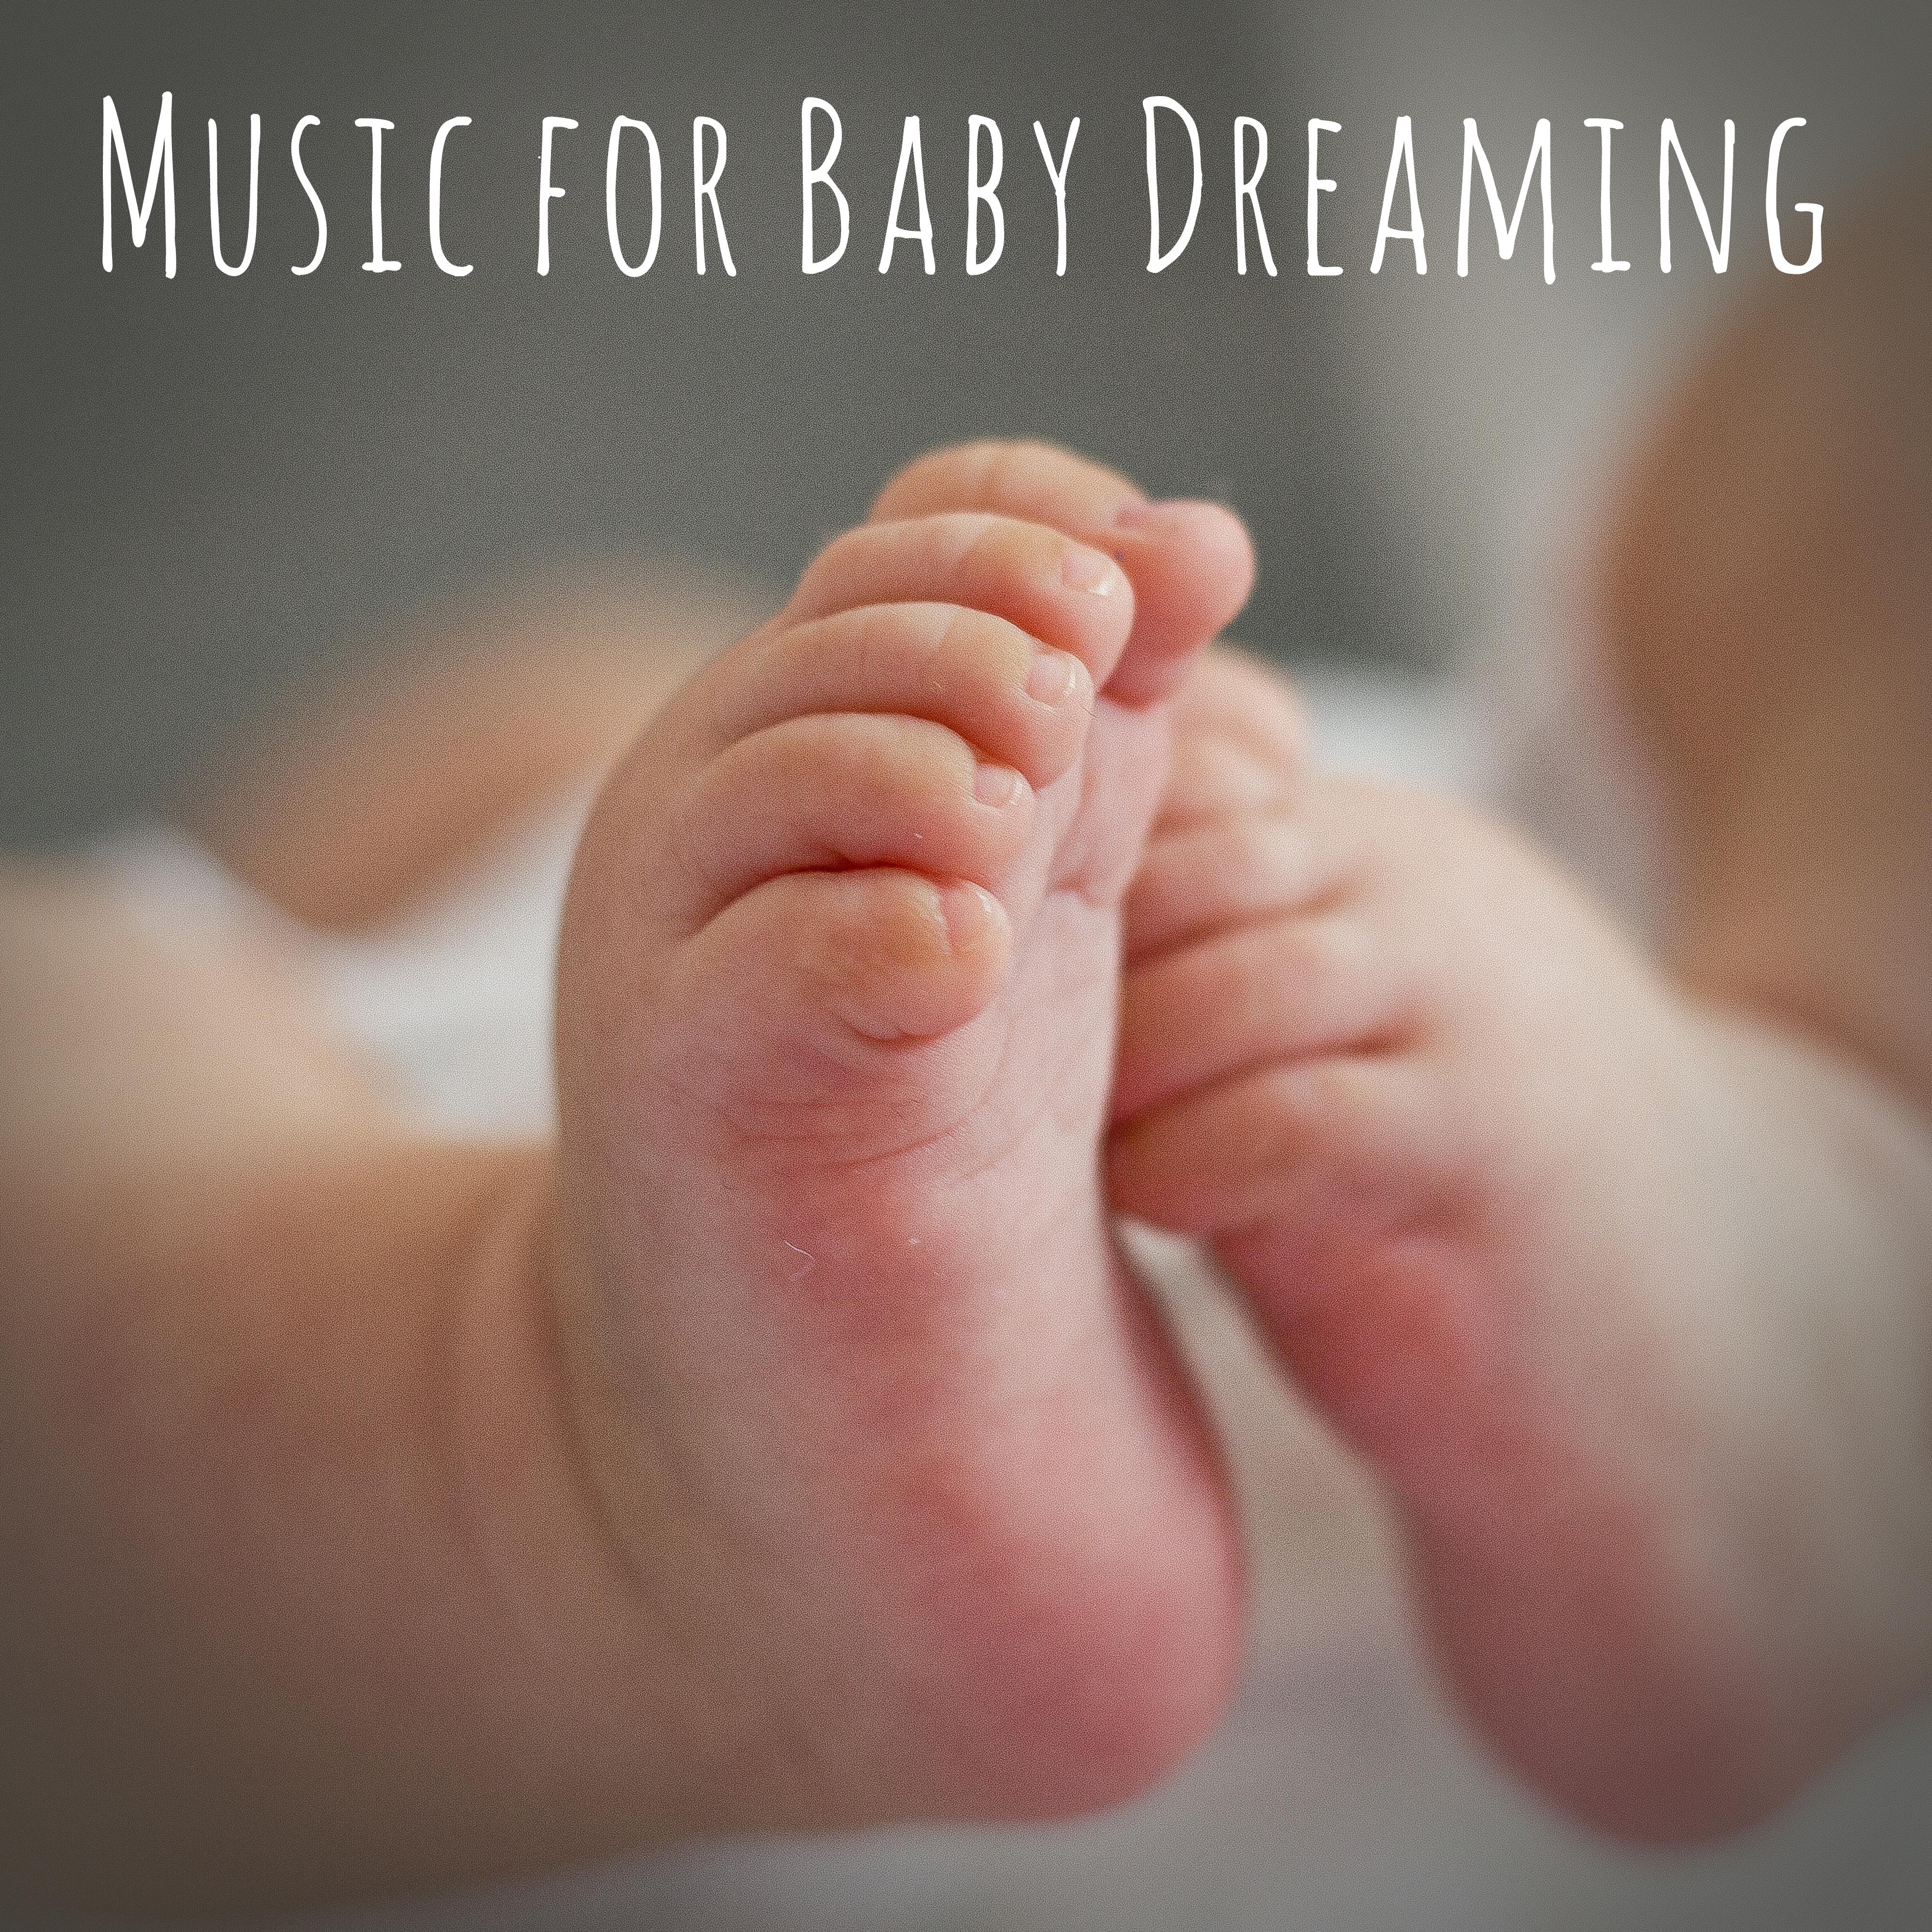 Music for Baby Dreaming